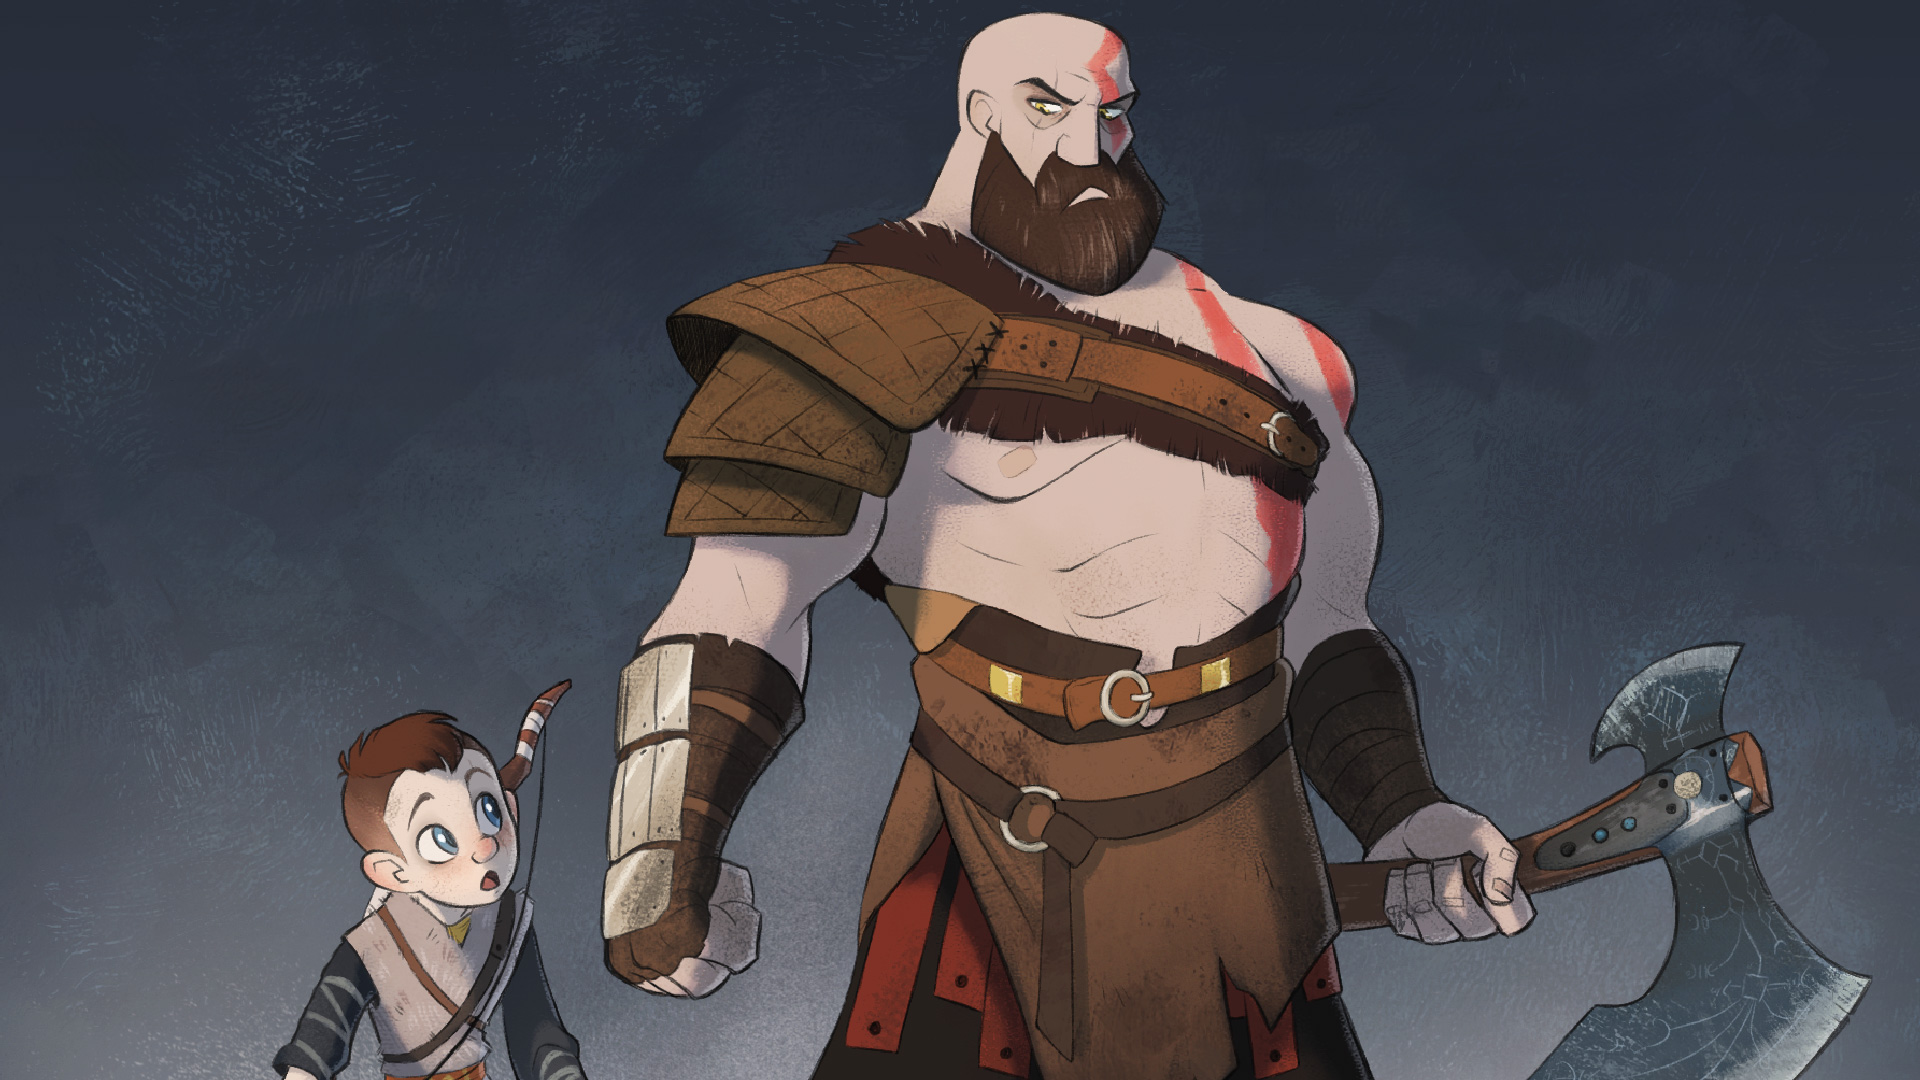 God Of War 4 Cartoon Artwork, HD Games, 4k Wallpapers, Images, Backgrounds,  Photos and Pictures